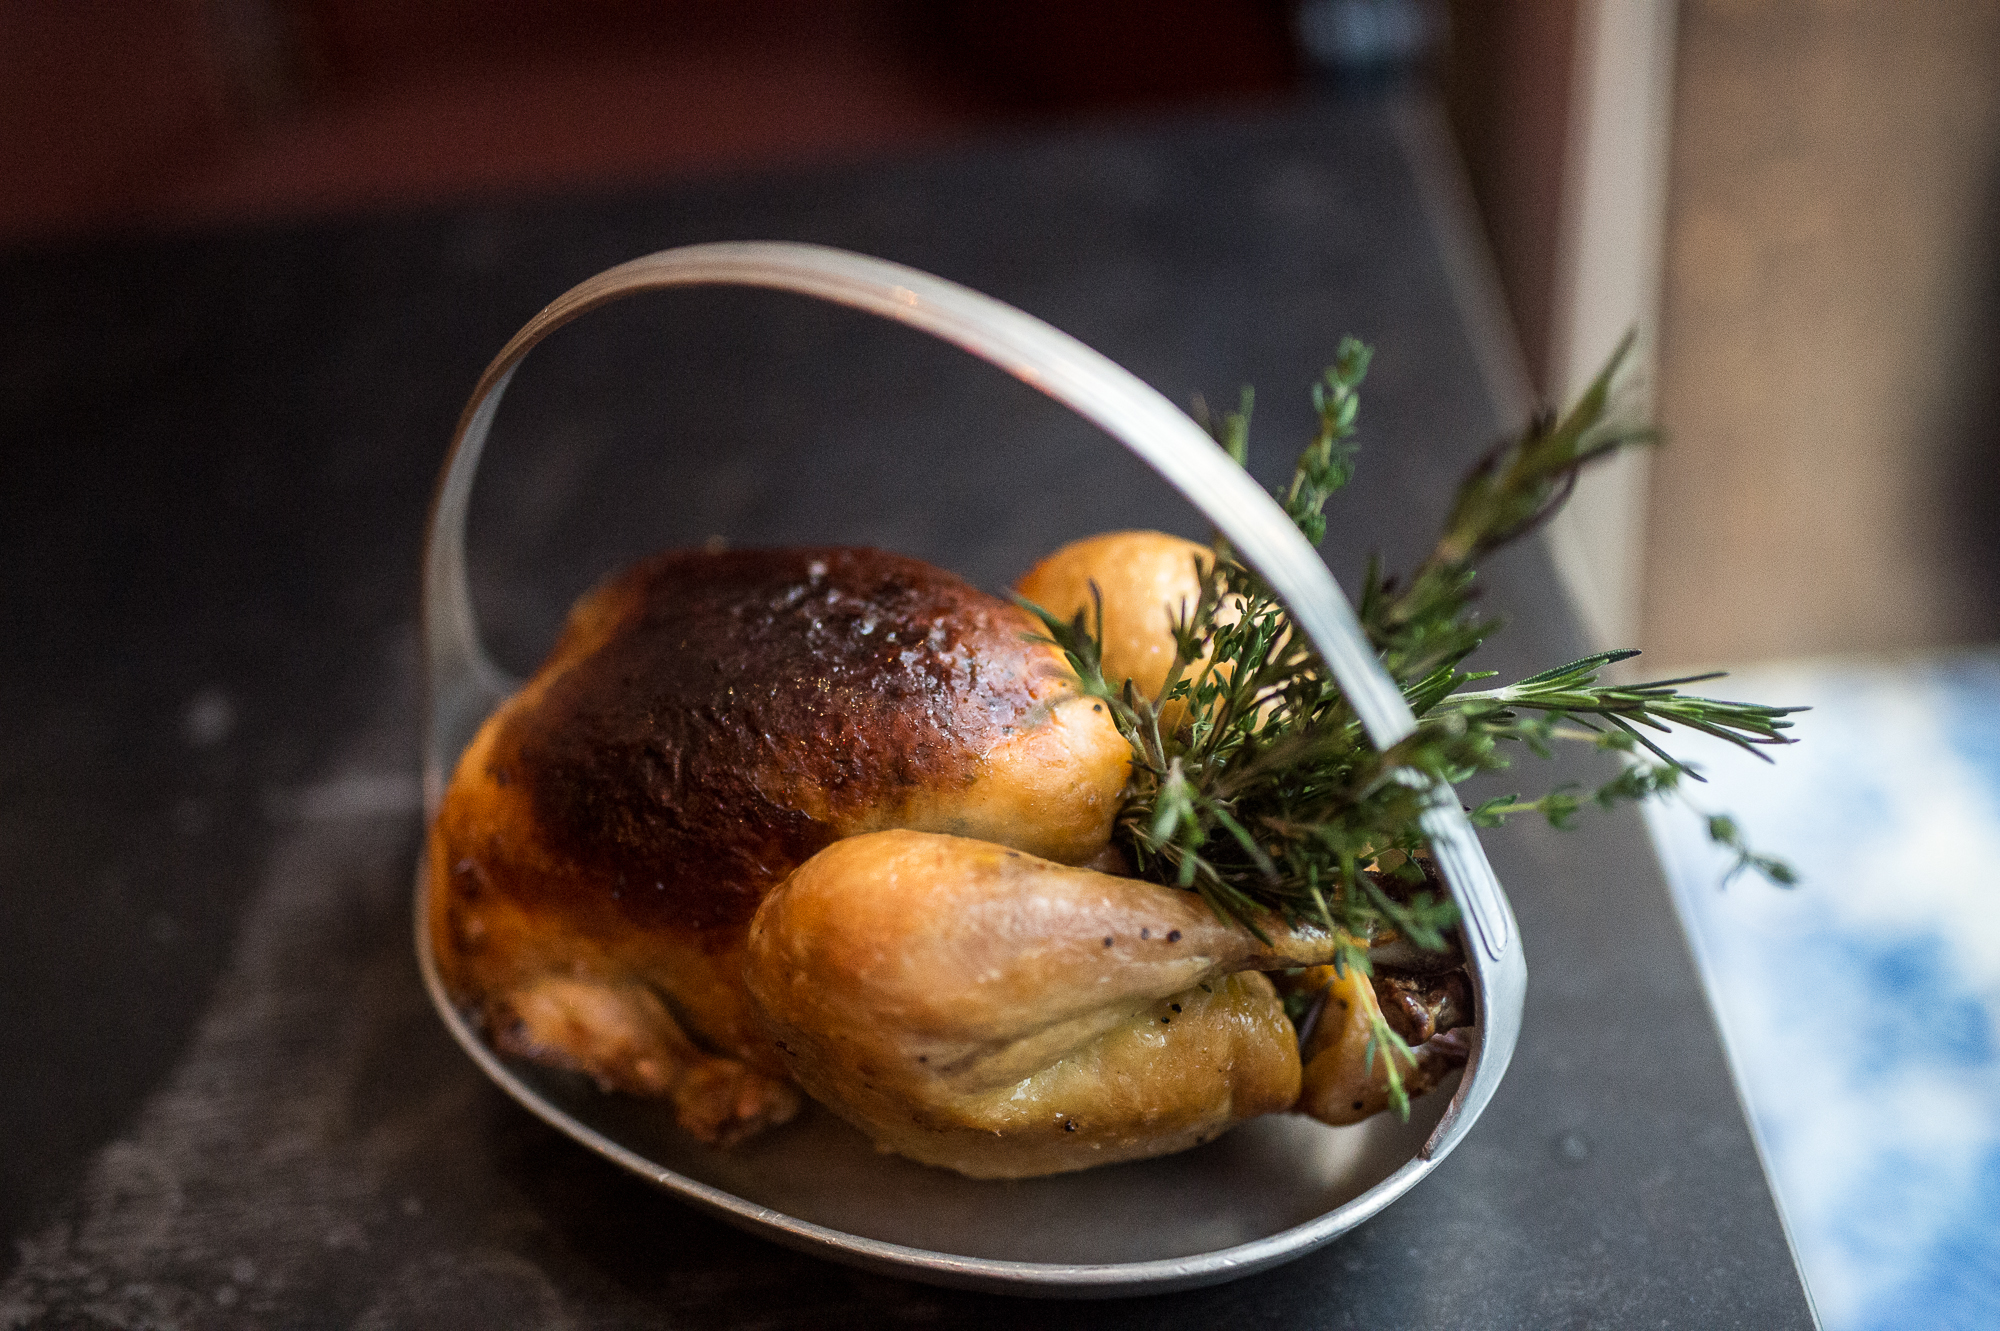 A roast chicken stuffed with herbs in a basket